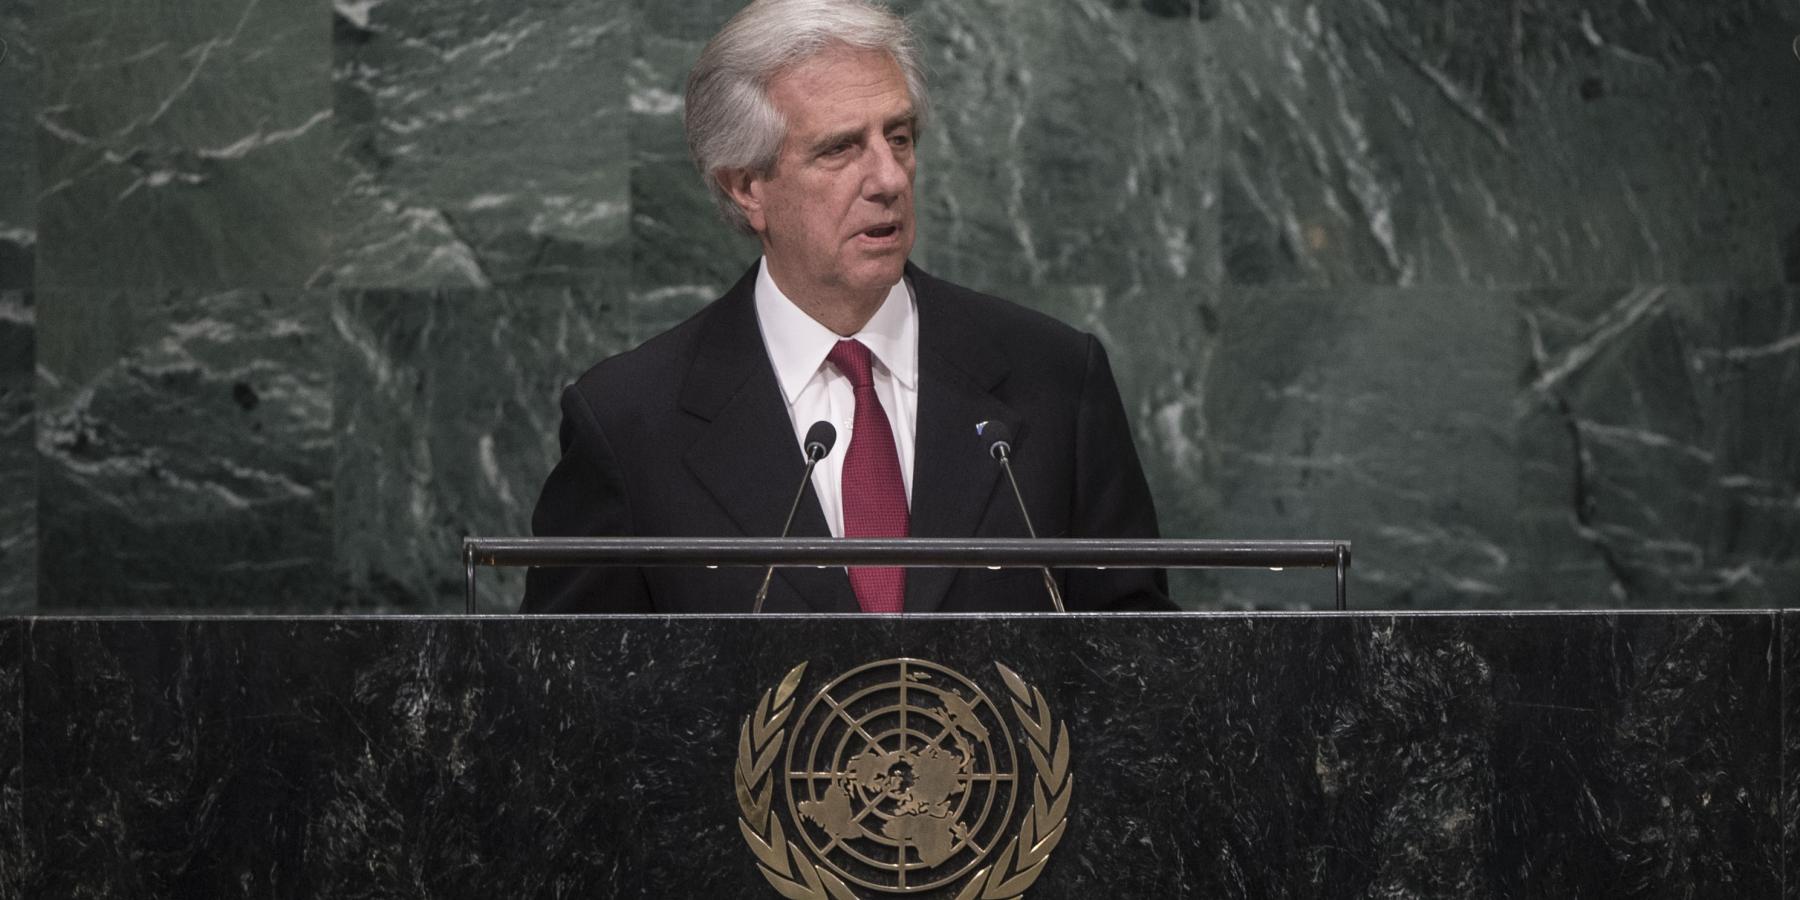 Dr Tabaré Vázquez, President of Uruguay, addresses-the-general-debate of the General Assembly’s seventieth session UNGA70